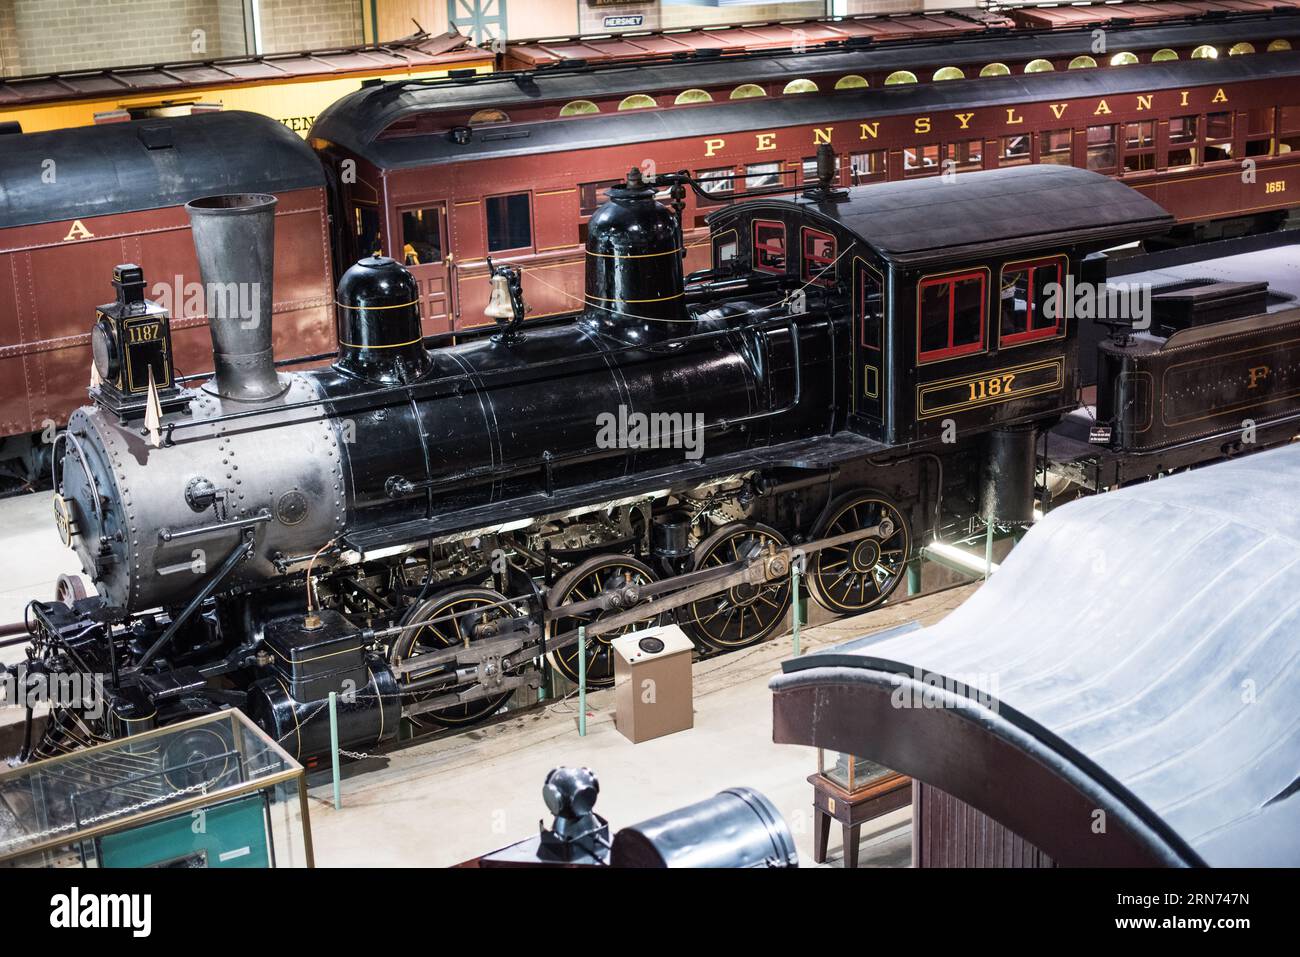 STRASBURG, Pennsylvania, United States — Visitors explore vintage locomotives and train cars at the Railroad Museum of Pennsylvania. Located in Strasburg, the museum preserves Pennsylvania's rich railroading history, housing one of the most significant collections of historic railroad artifacts in the world. Stock Photo